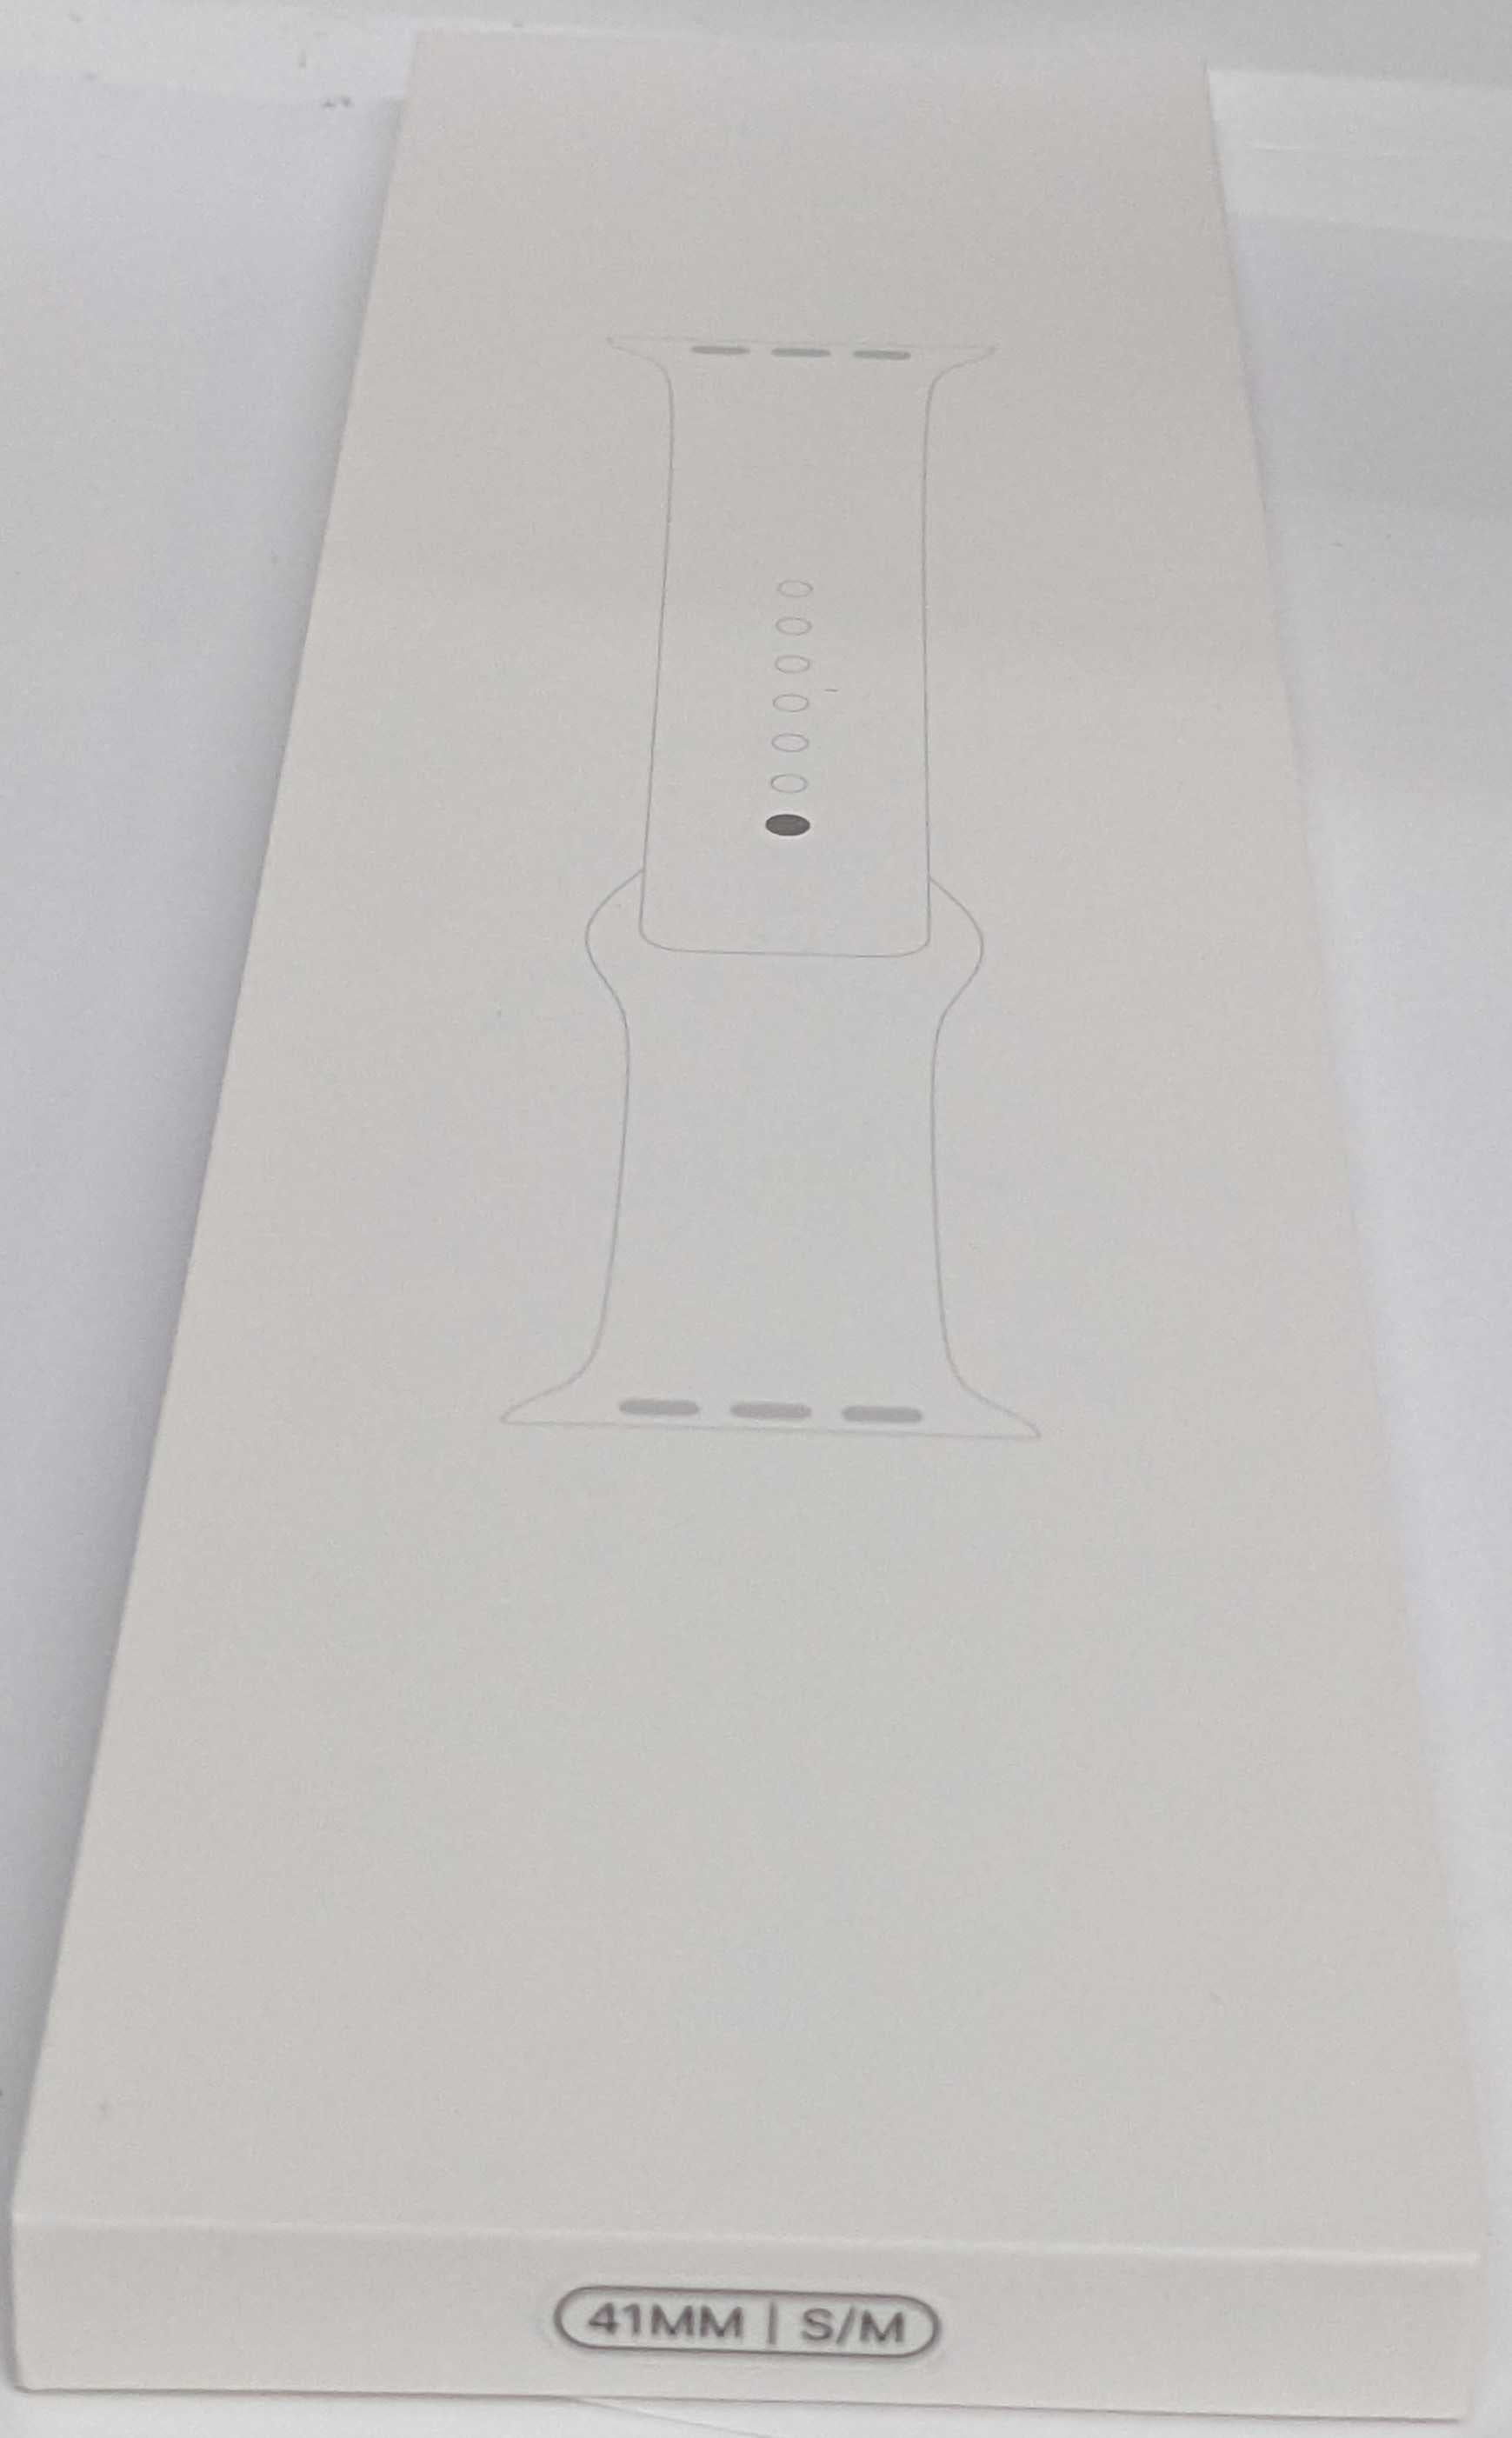 (Fits S/M 130mm–180mm Apple (41mm)White Sport Band wrists Watch ) Genuine Band